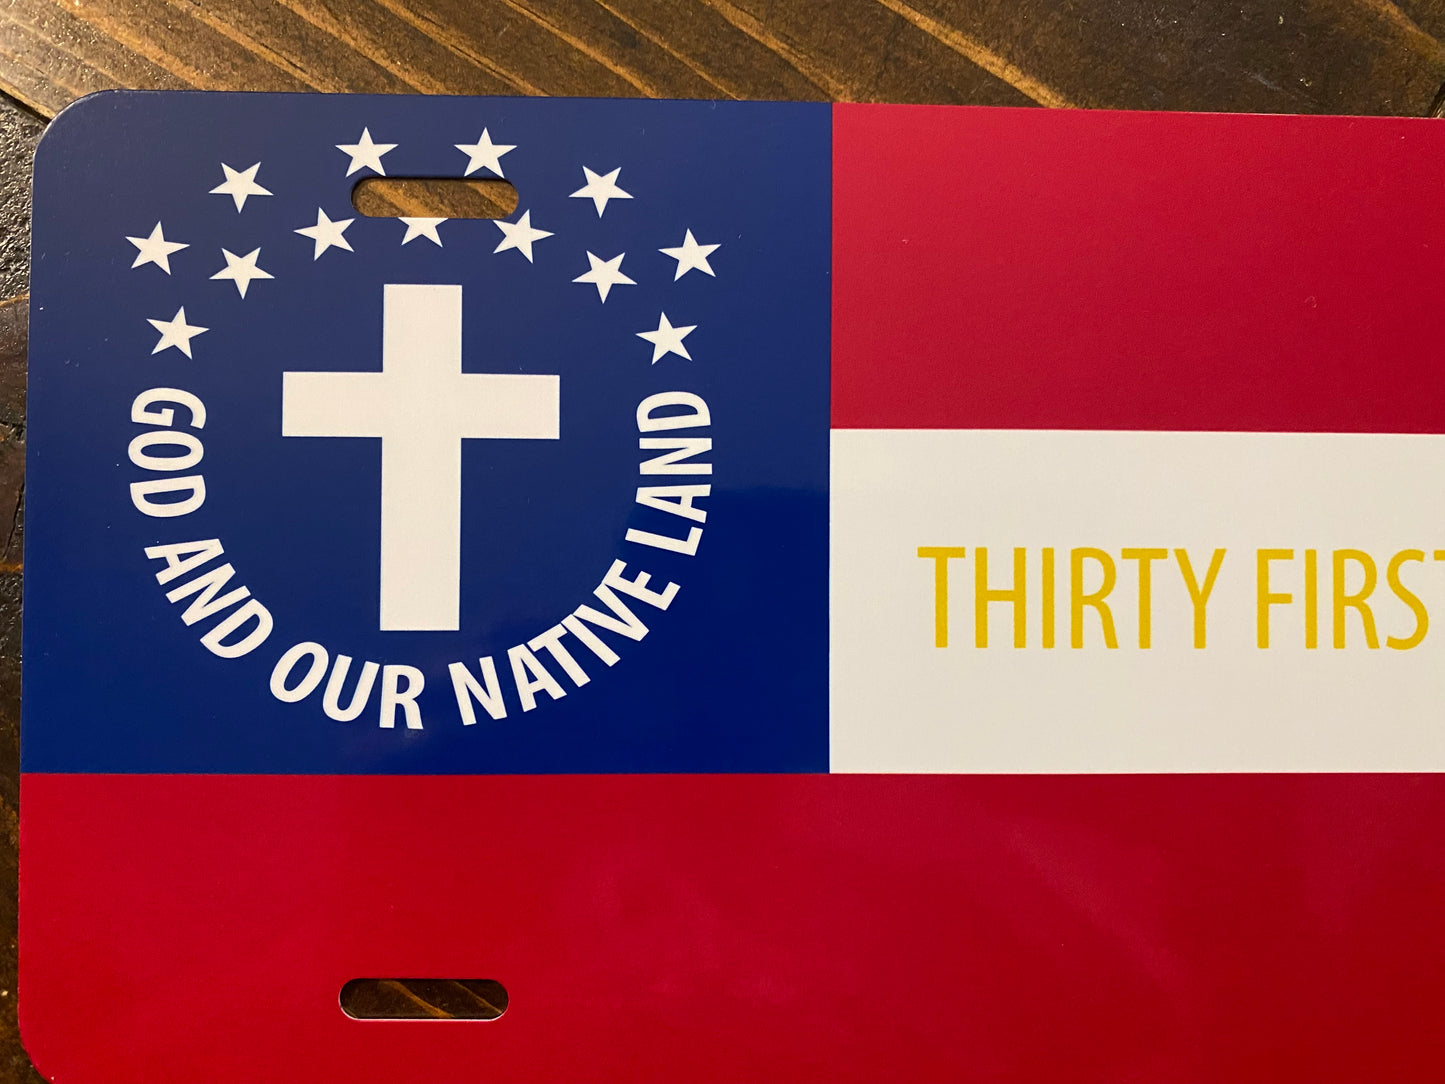 "God and Our Native Land" 31st Alabama Car Tag/Plate